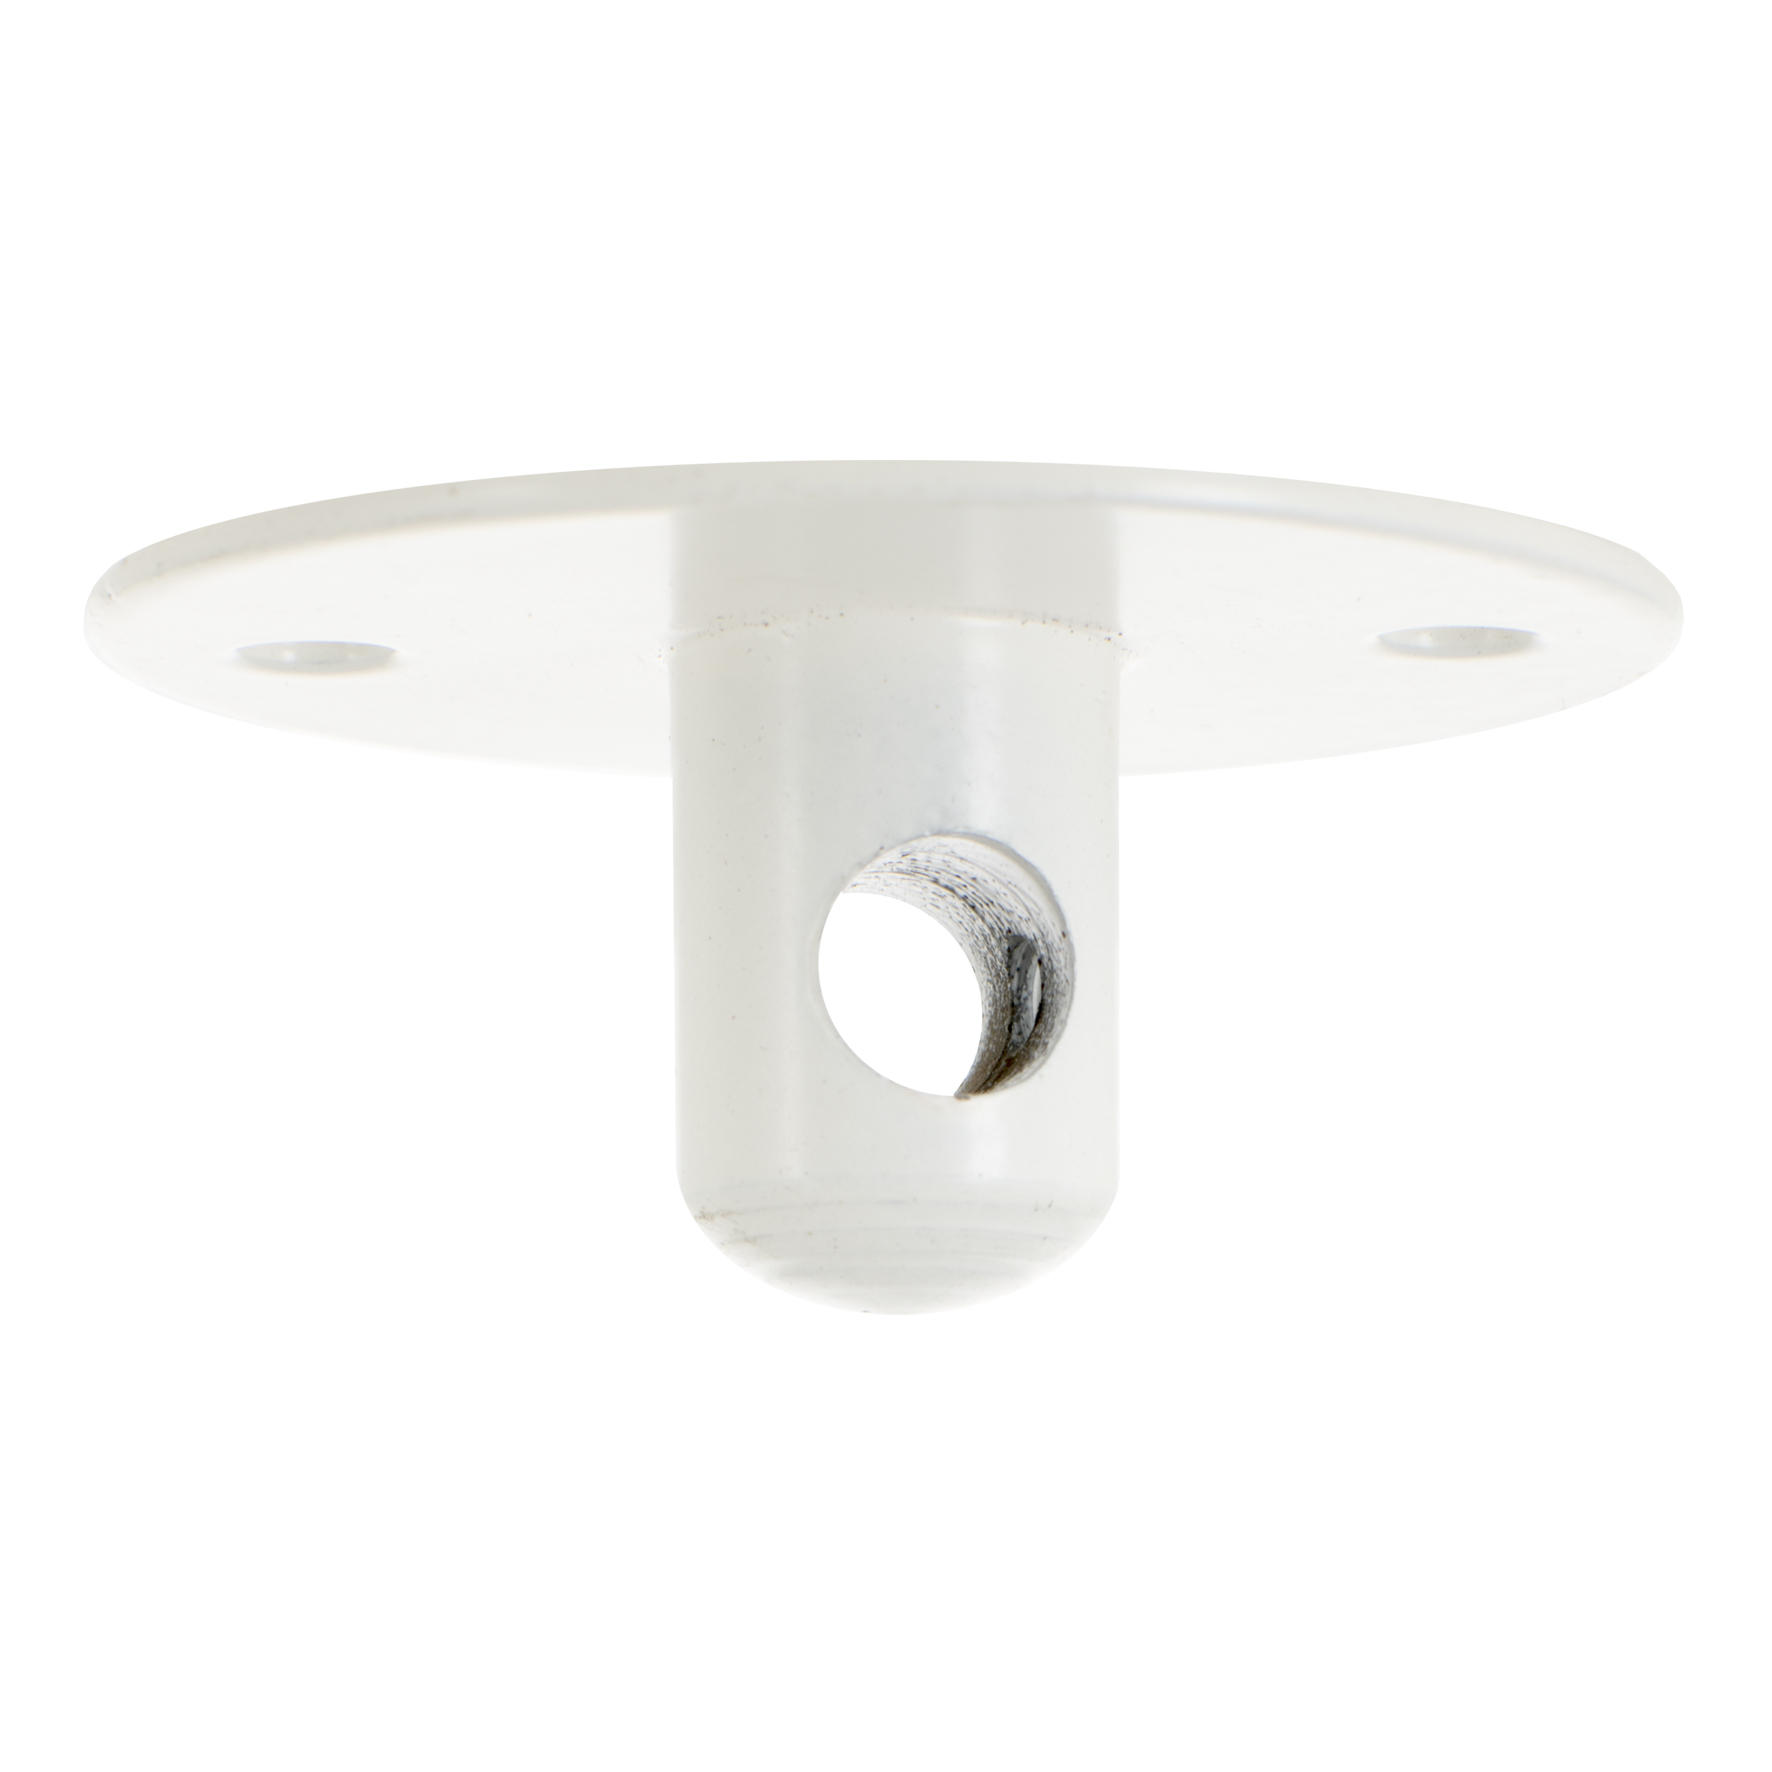 Ceiling/Wall Cord Grip White